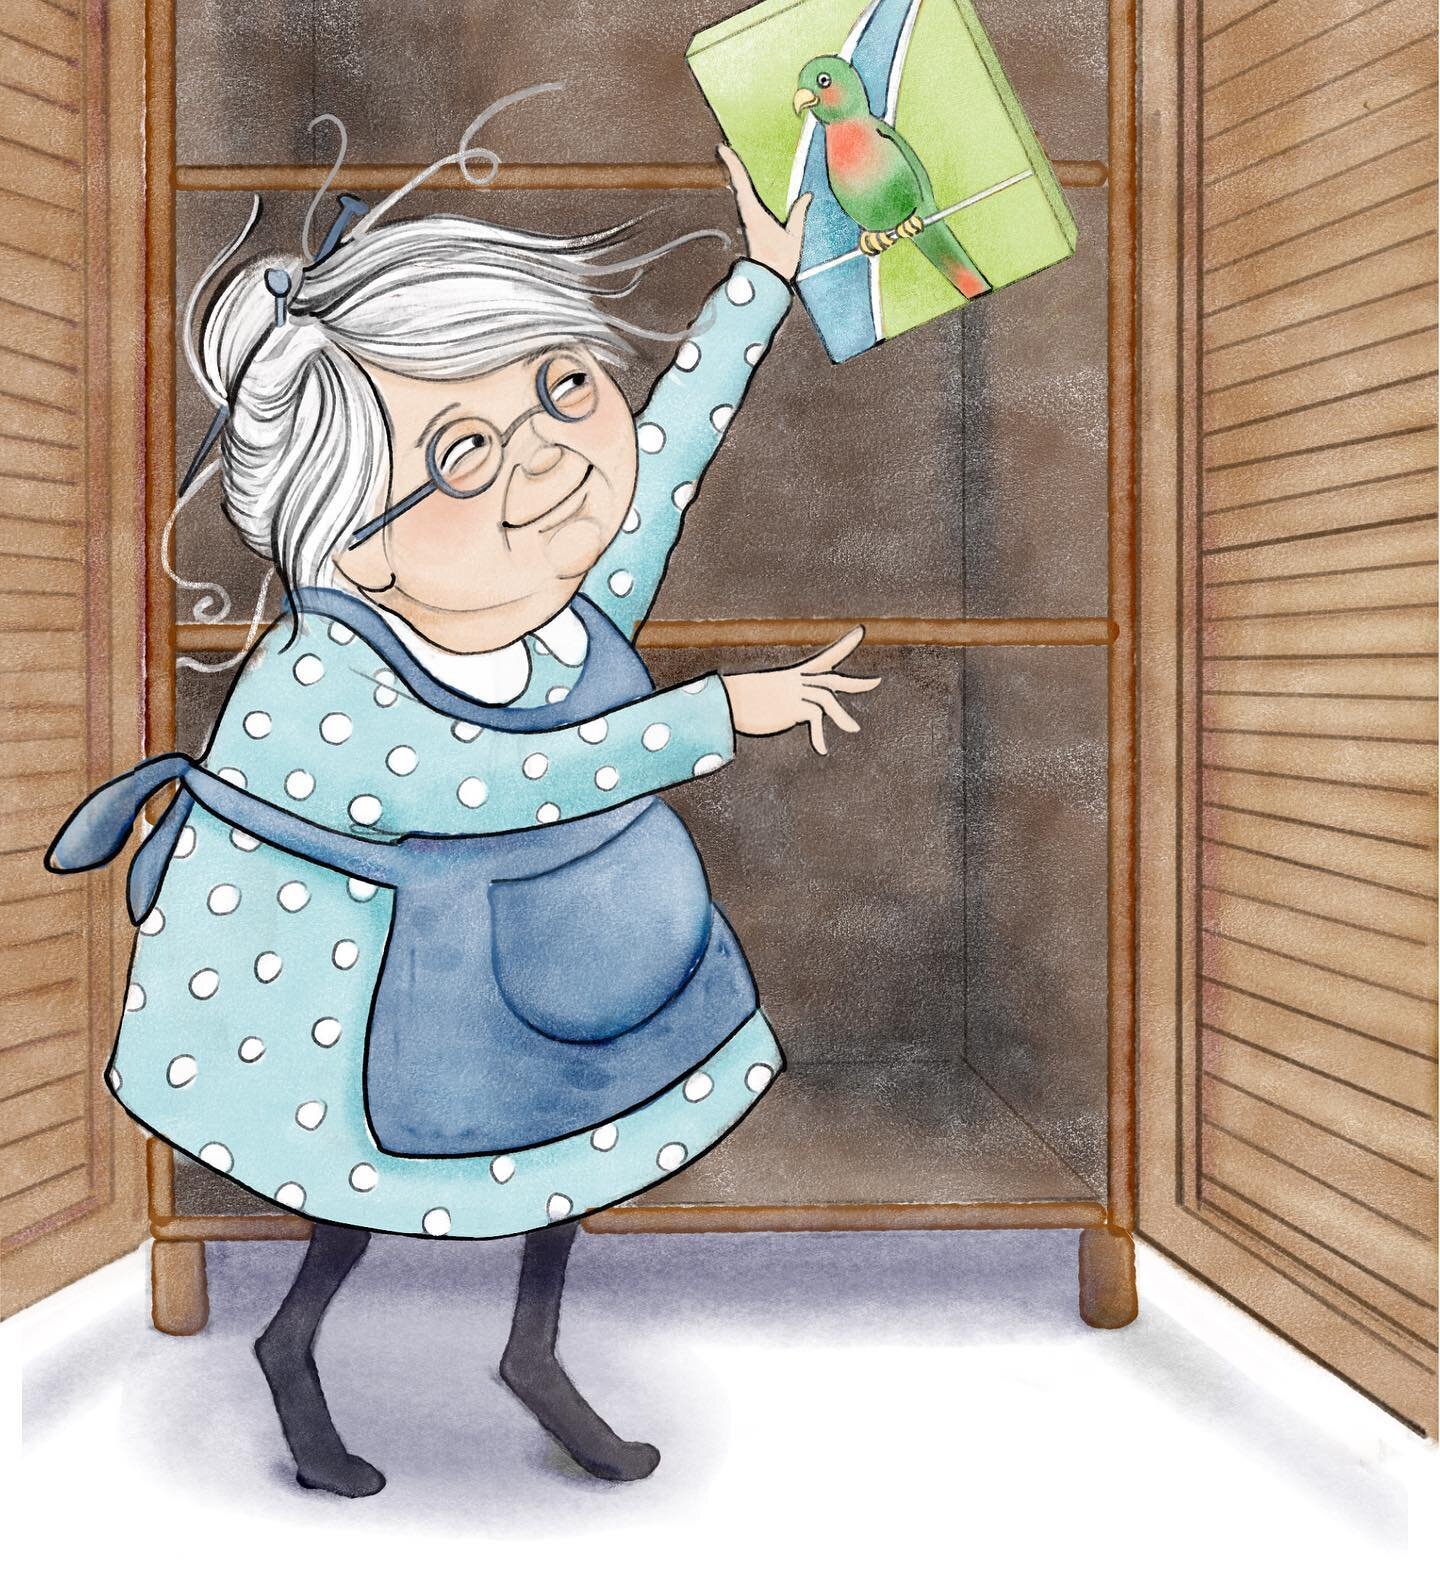 An illustration from a reader about cooking with Grandma... with a difference. Can you tell I&rsquo;m enjoying these? Posted with the permission of Multilit.
.
.
.
.
.
.
.
.
.
.
.
#picturebookillustration #illustrationforkids #childrensbookillustrati